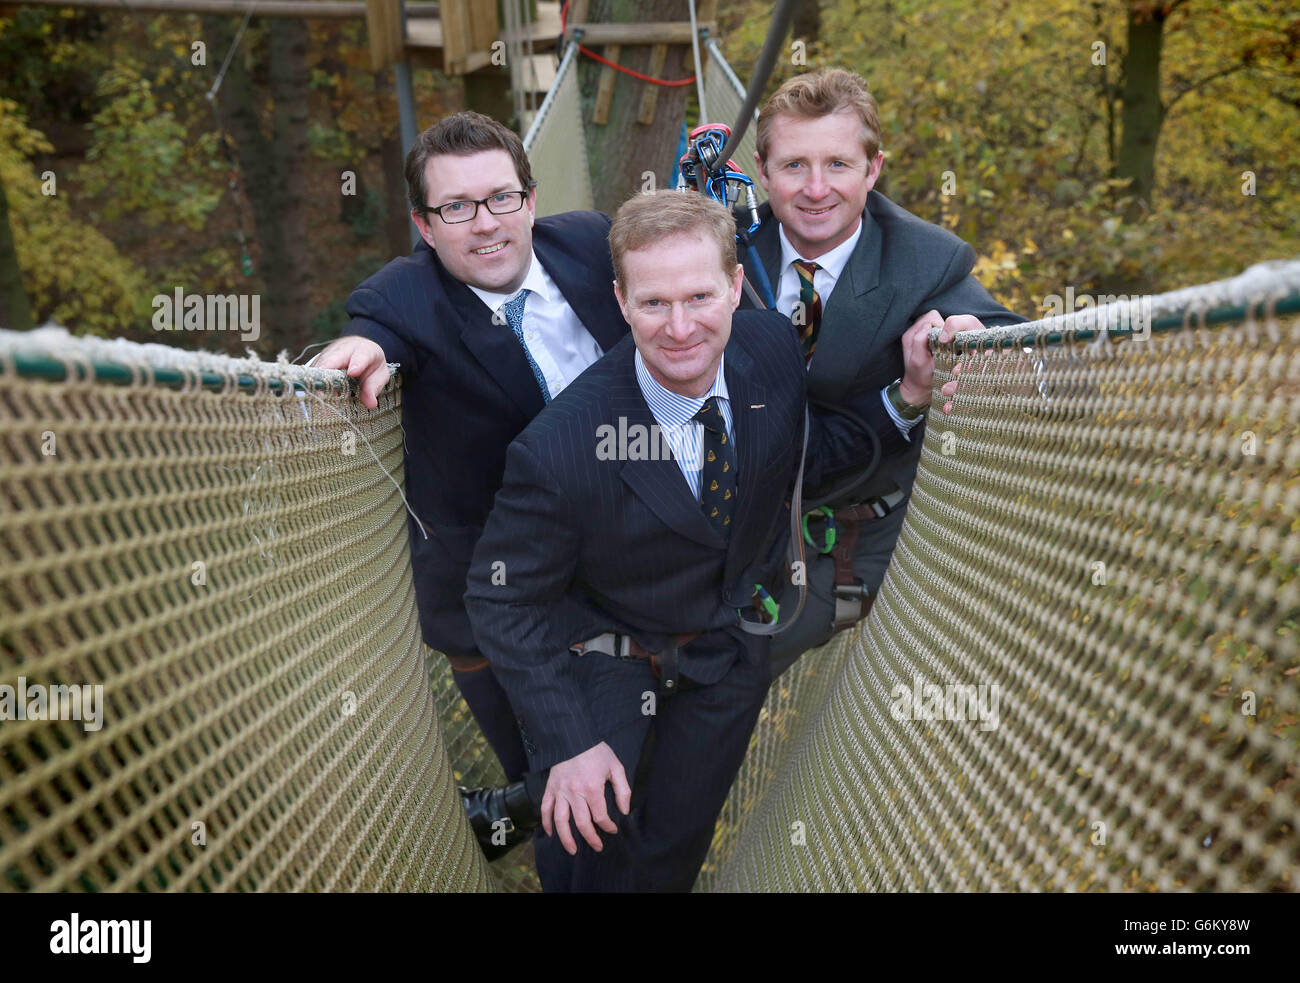 (Left to right) Nigel Ashfield, MD of TIME Investments, Stuart Nicol, Fund Manager of TIME:REBOOT VCT and Tristram Mayhew, Founder of Go Ape and Non-Executive Director of Reboot, experience the Tree Top Adventure at Go Ape in Cockfosters, north London, to launch a new Venture Capital Trust investing in ex-military entrepreneurs, TIME: REBOOT VCT. Stock Photo